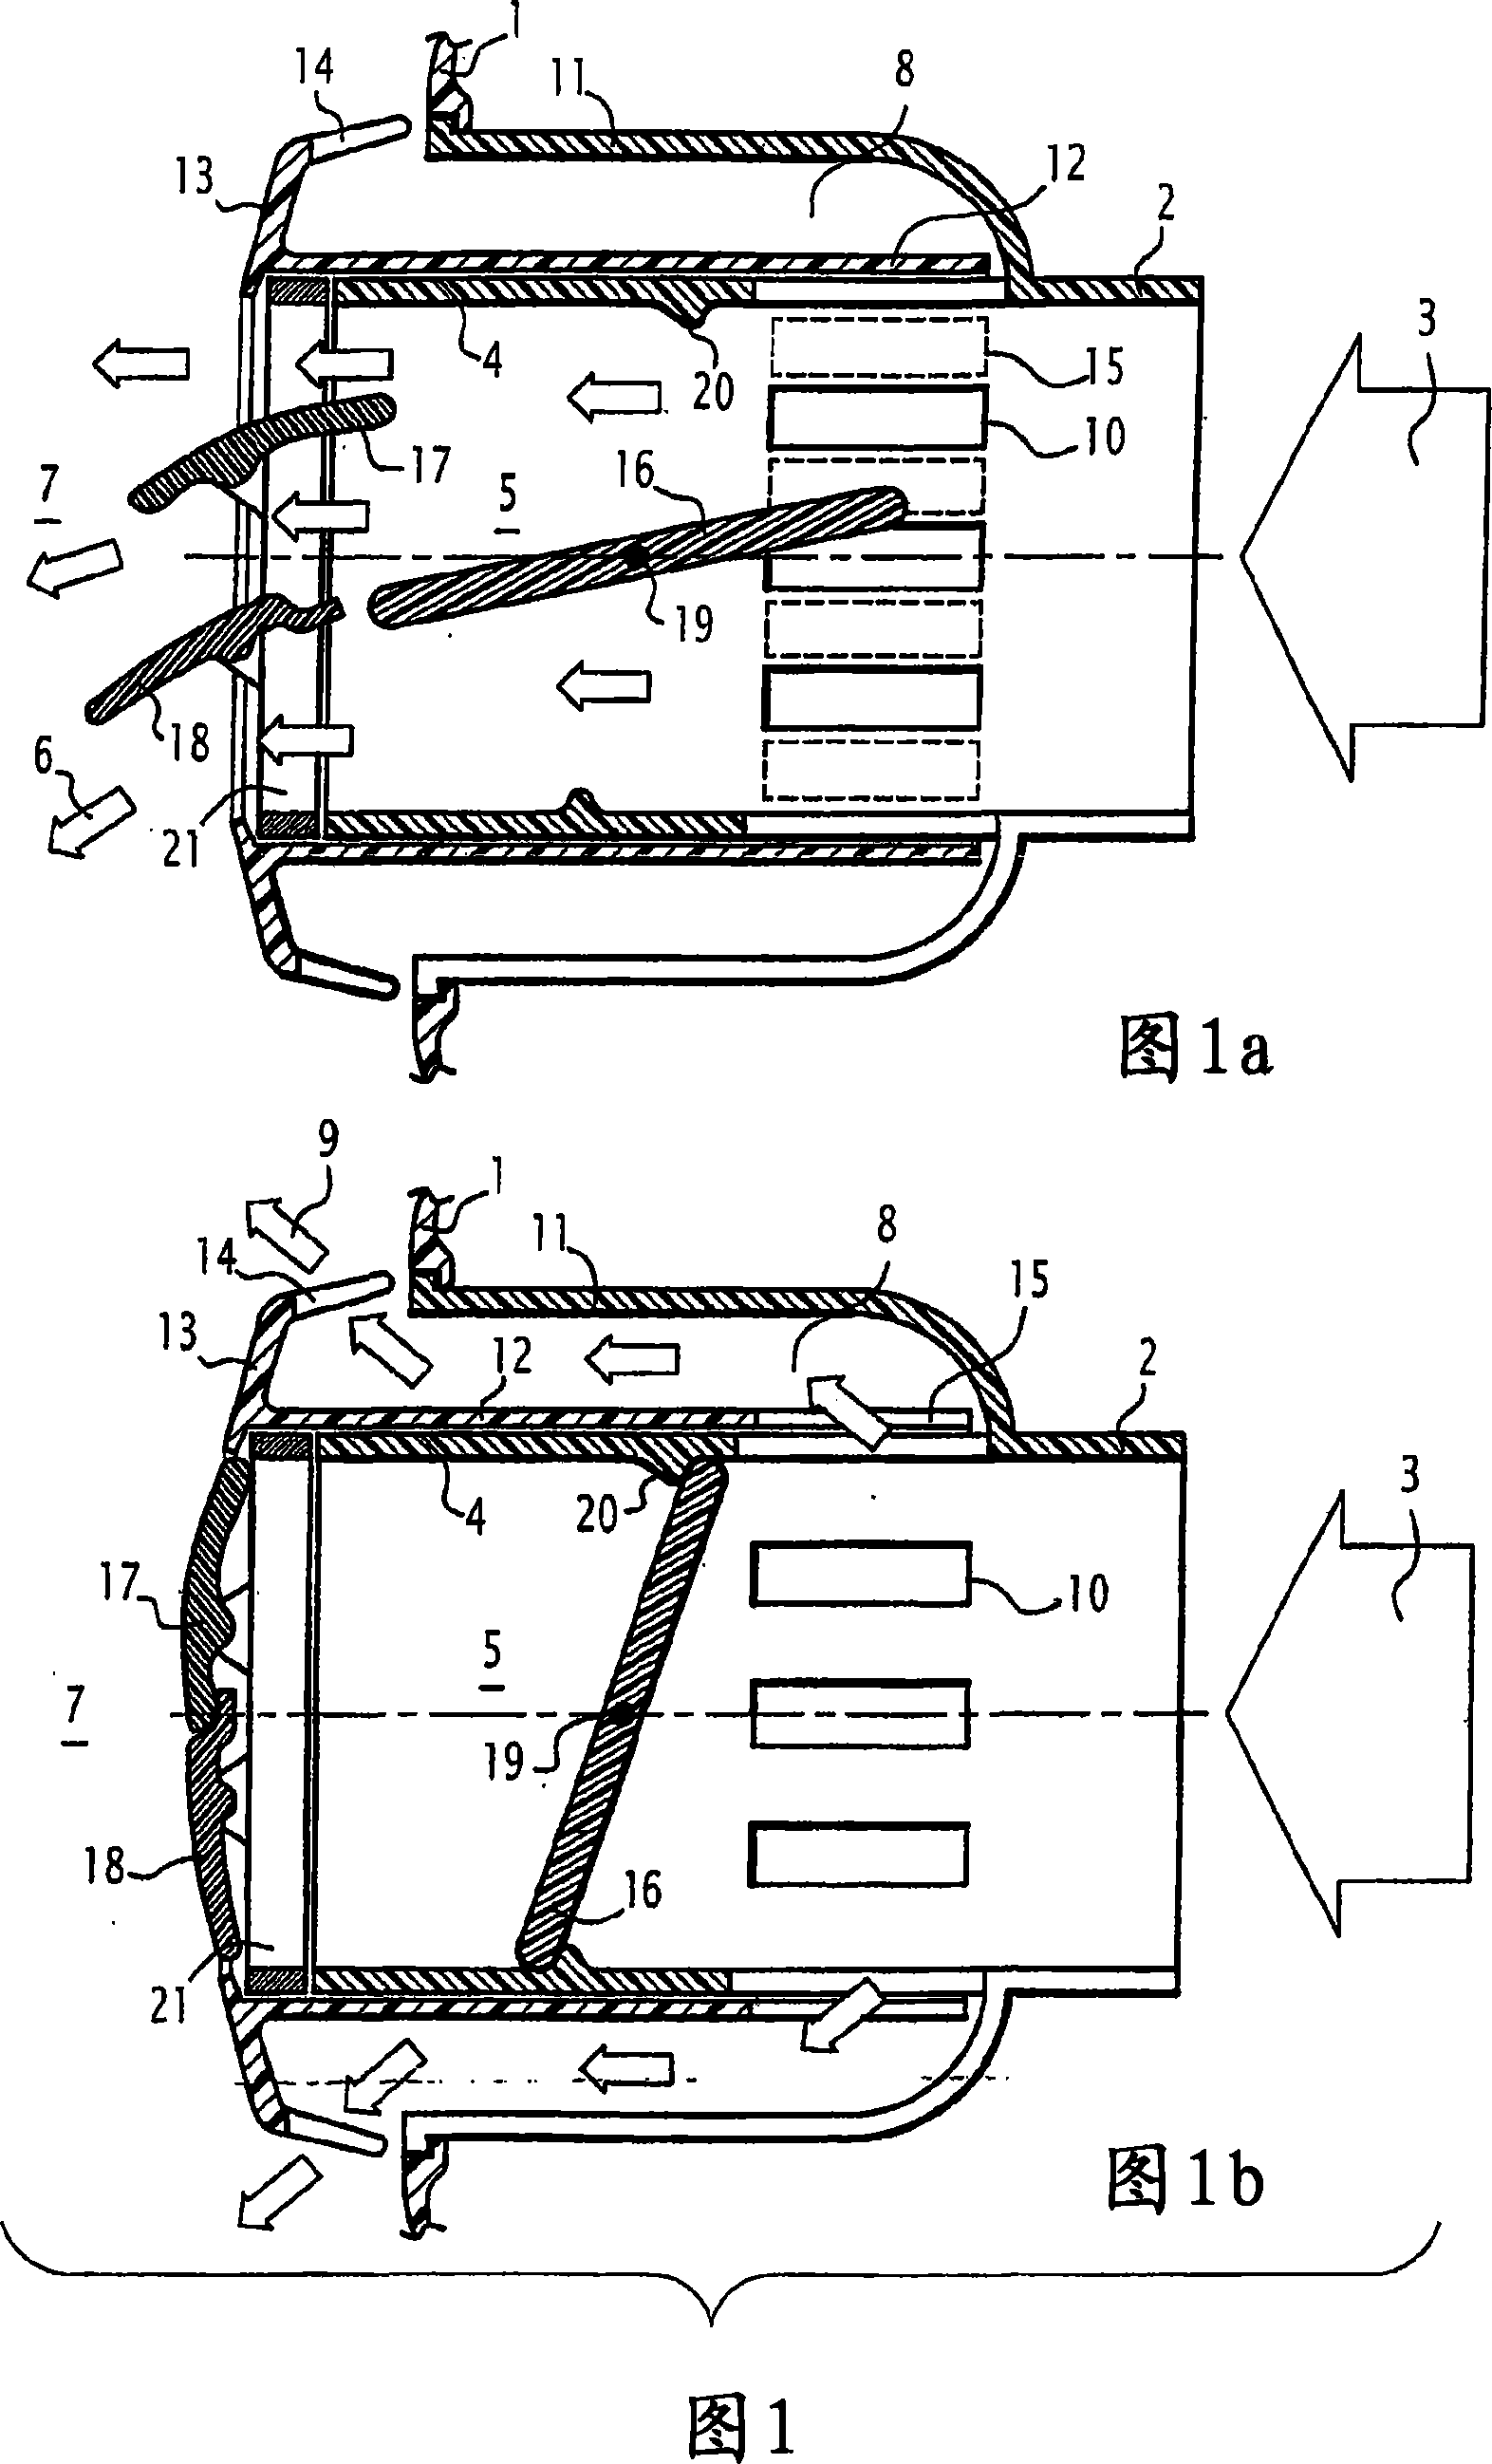 Ventilator flap for a ventilation system in a vehicle cabin